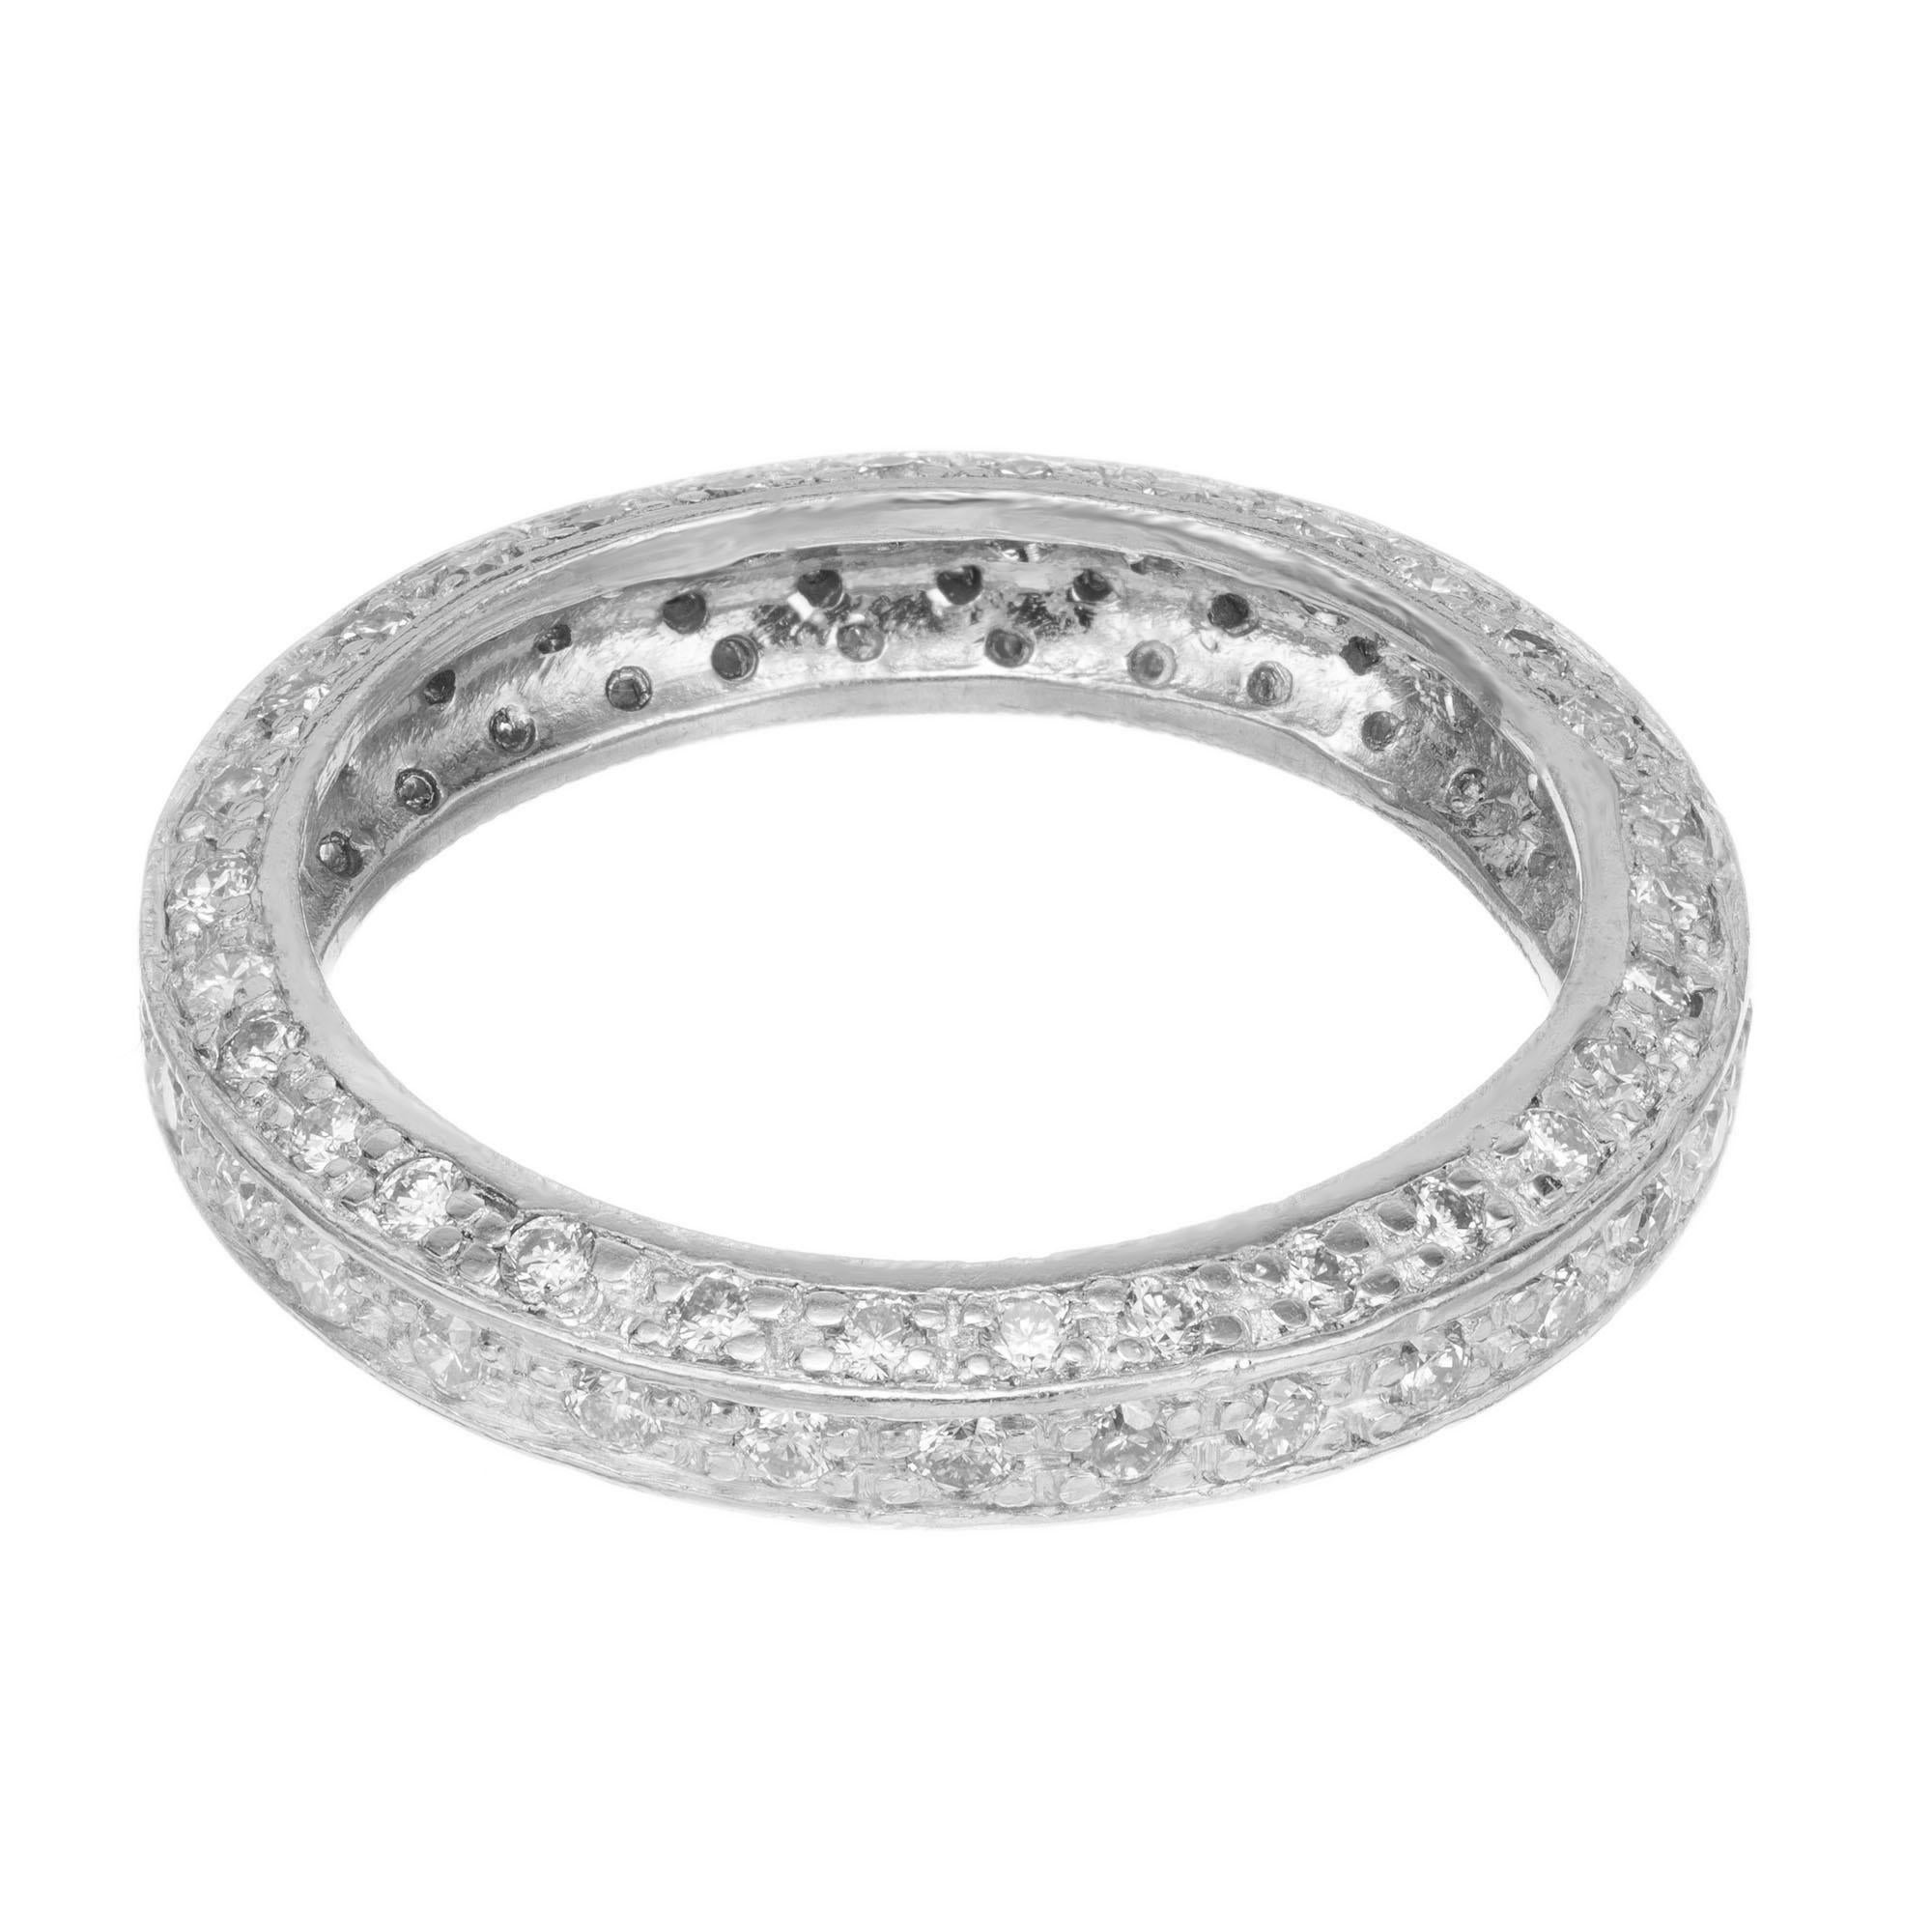 Diamond platinum eternity wedding band ring. 90 round brilliant cut pave set diamonds, on top, middle and bottom sides, set in platinum.

90 round brilliant cut diamonds, G-H SI approx. 1.00cts
Size 6 and not sizable 
Platinum 
Tested: Platinum 
4.8